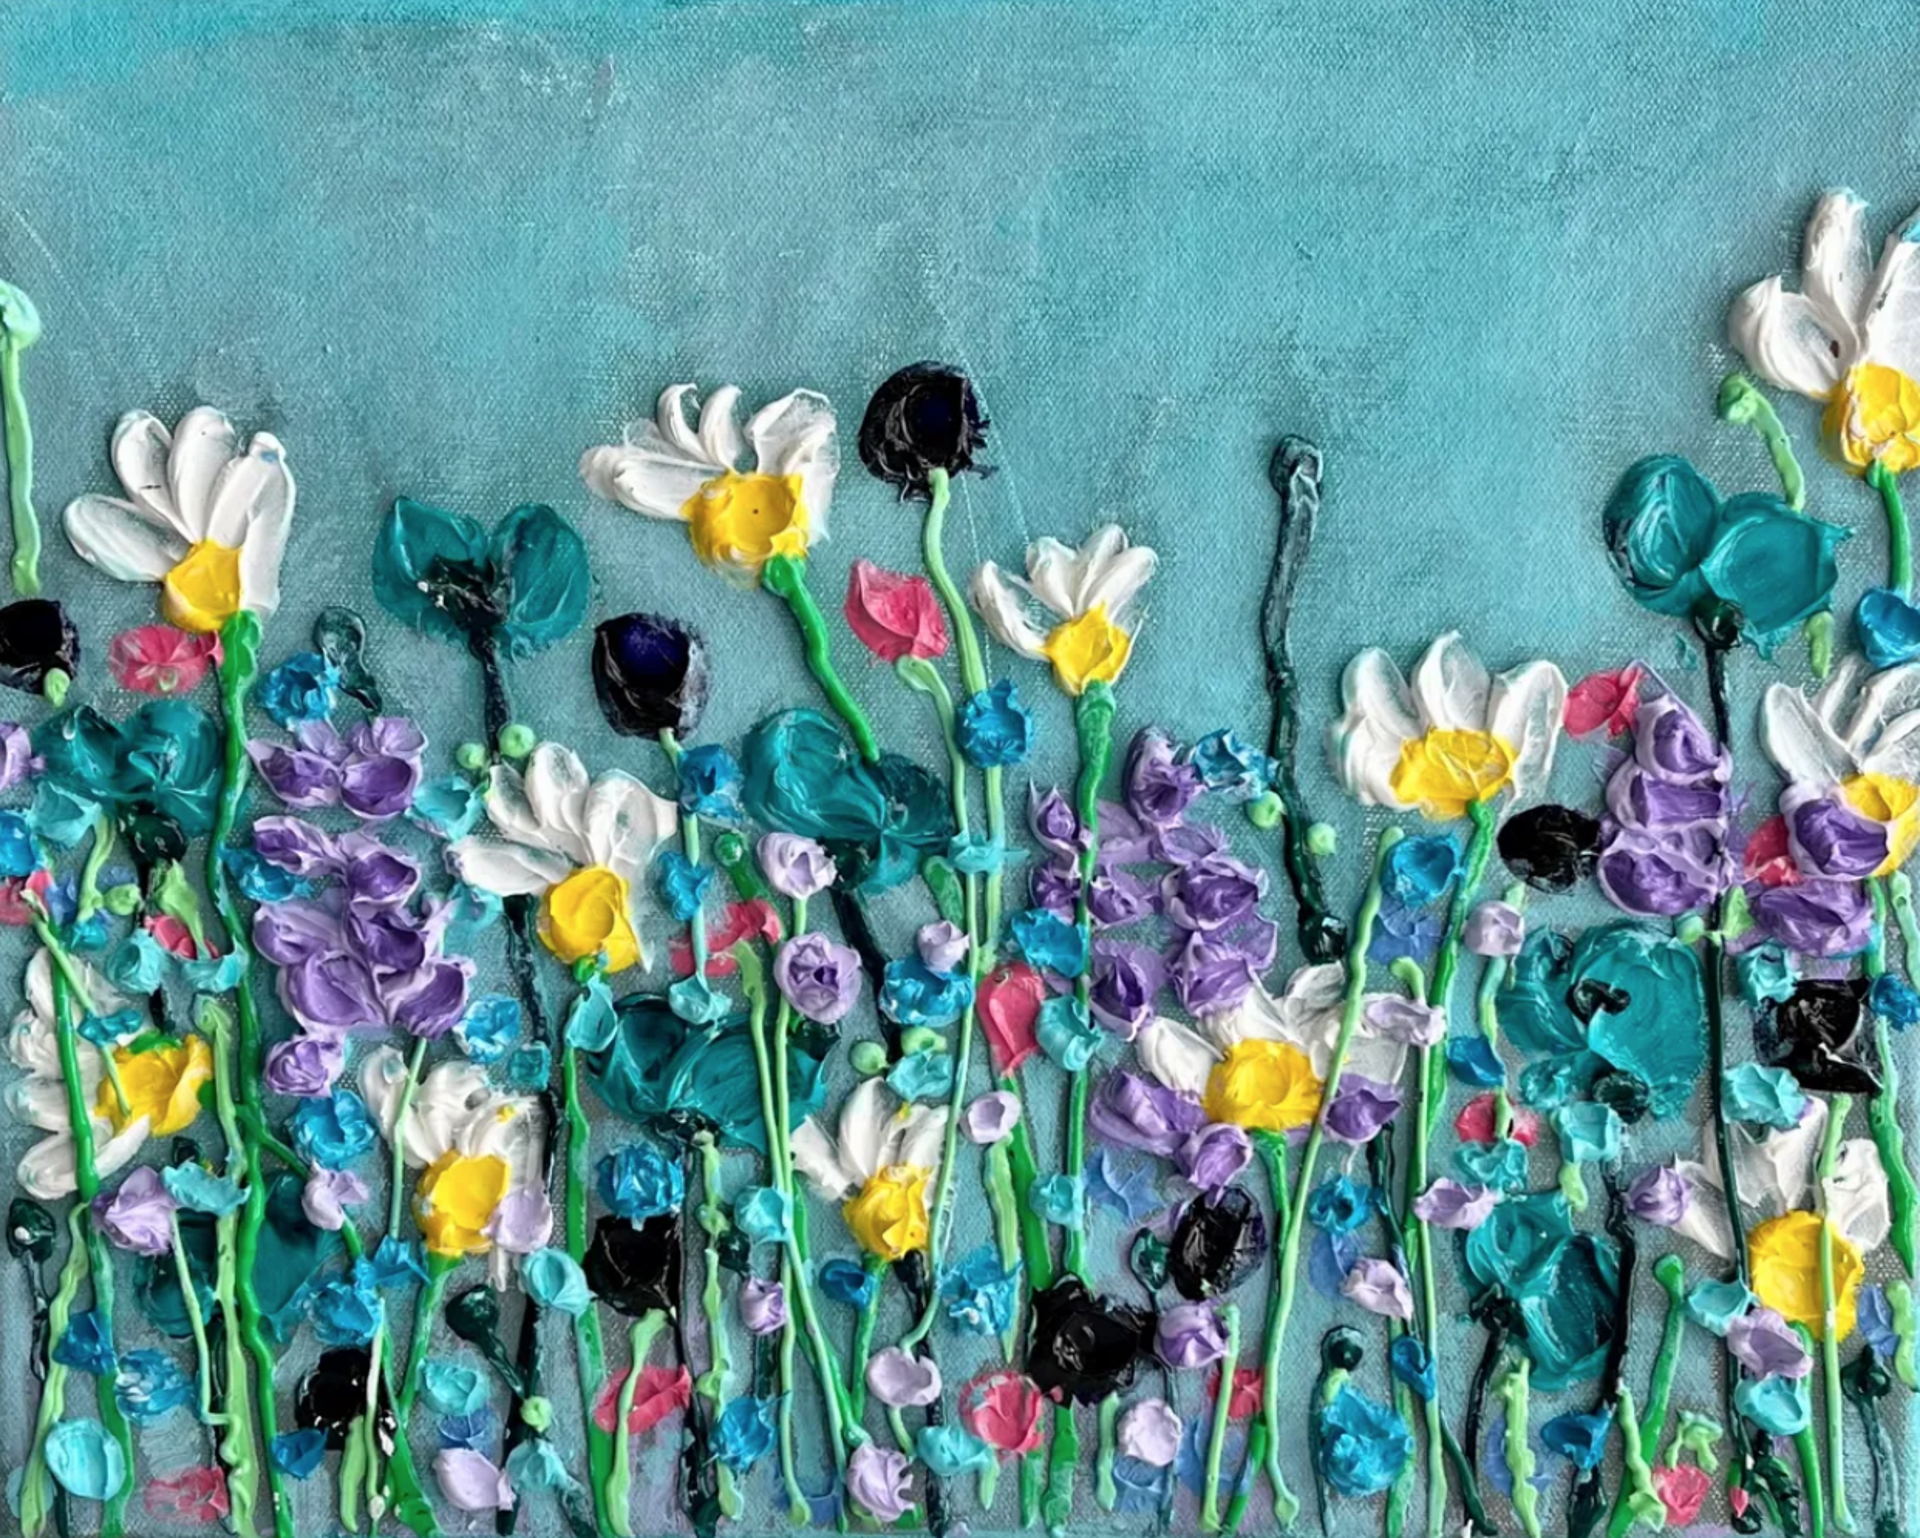 Turquoise and Lavender by Edward Rittenberg